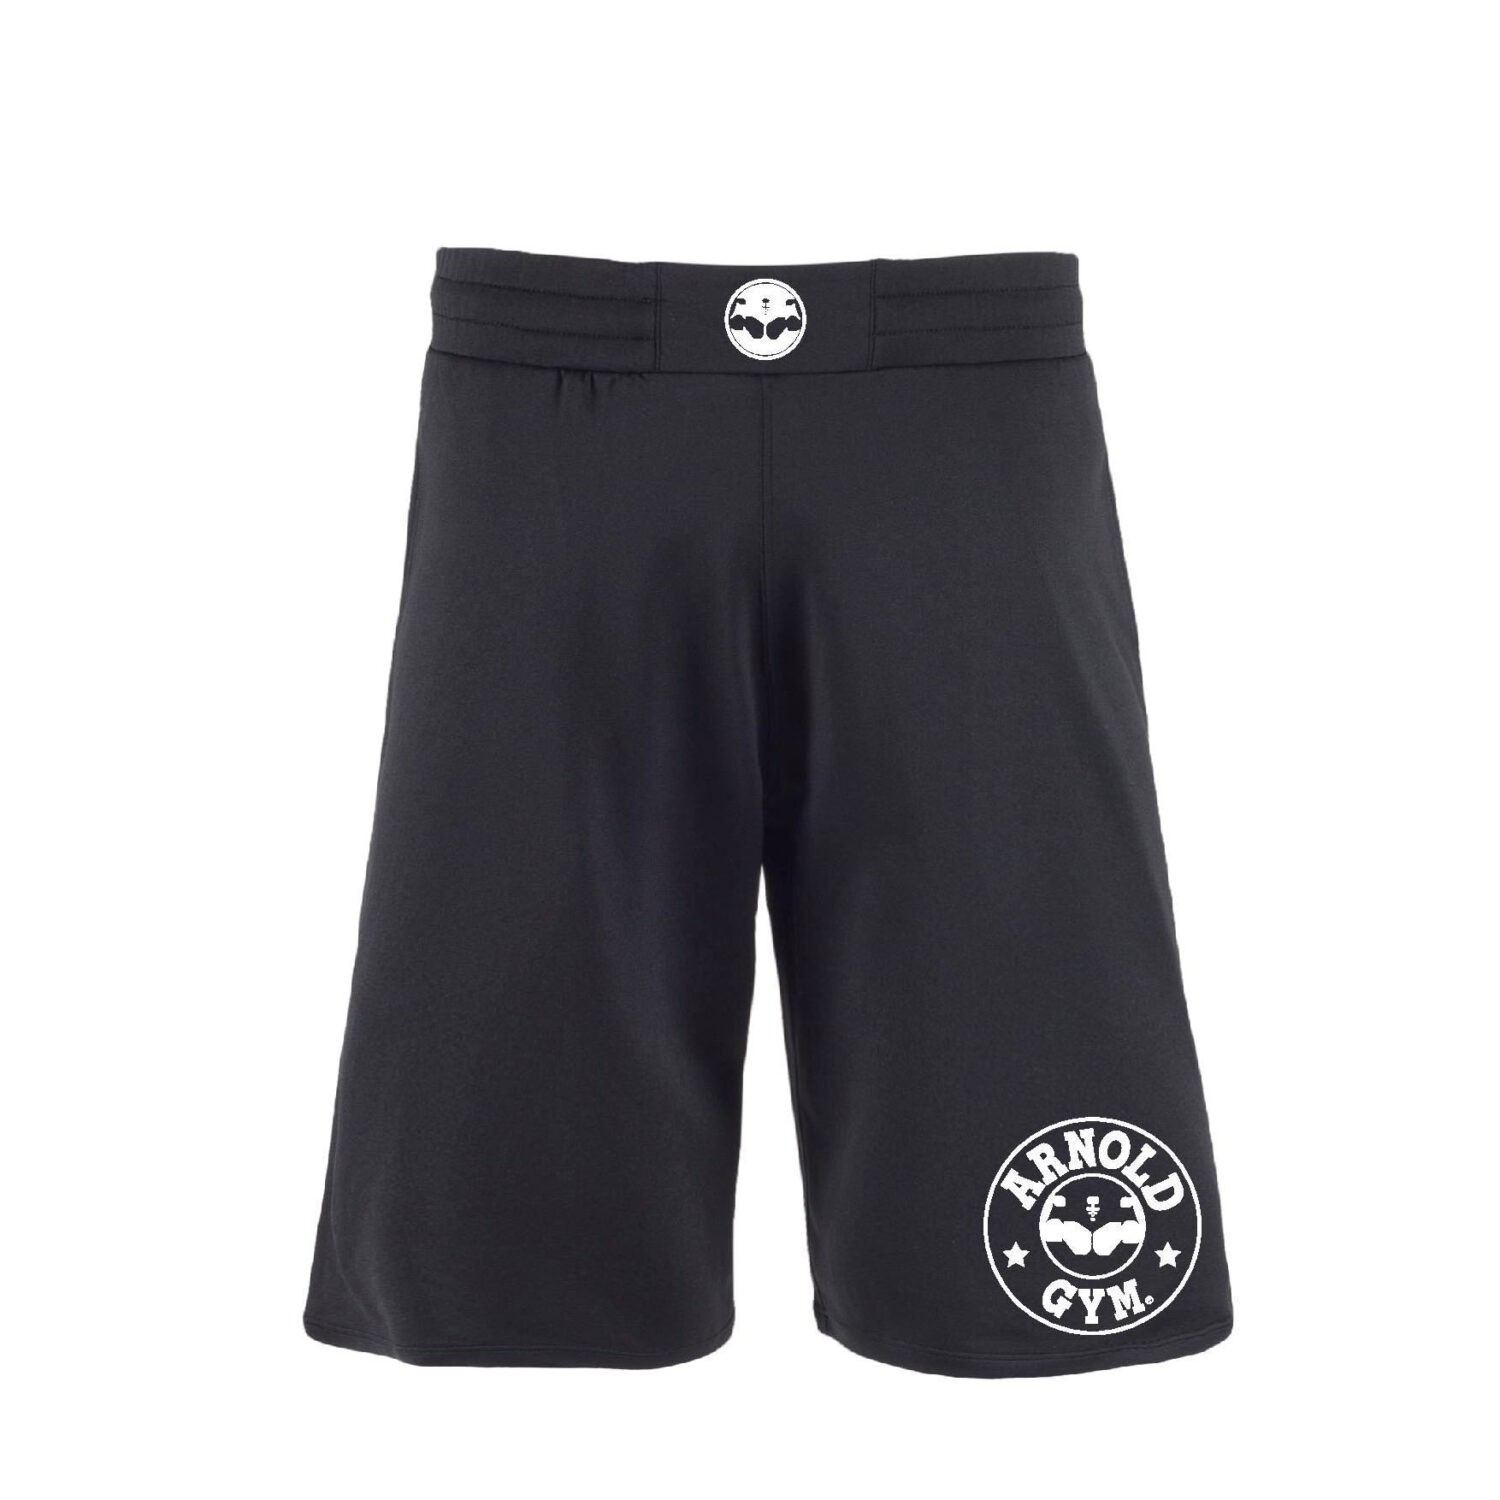 Men's Fitness Training Shorts | Workout & Gym Shorts | Arnold Gym Wear